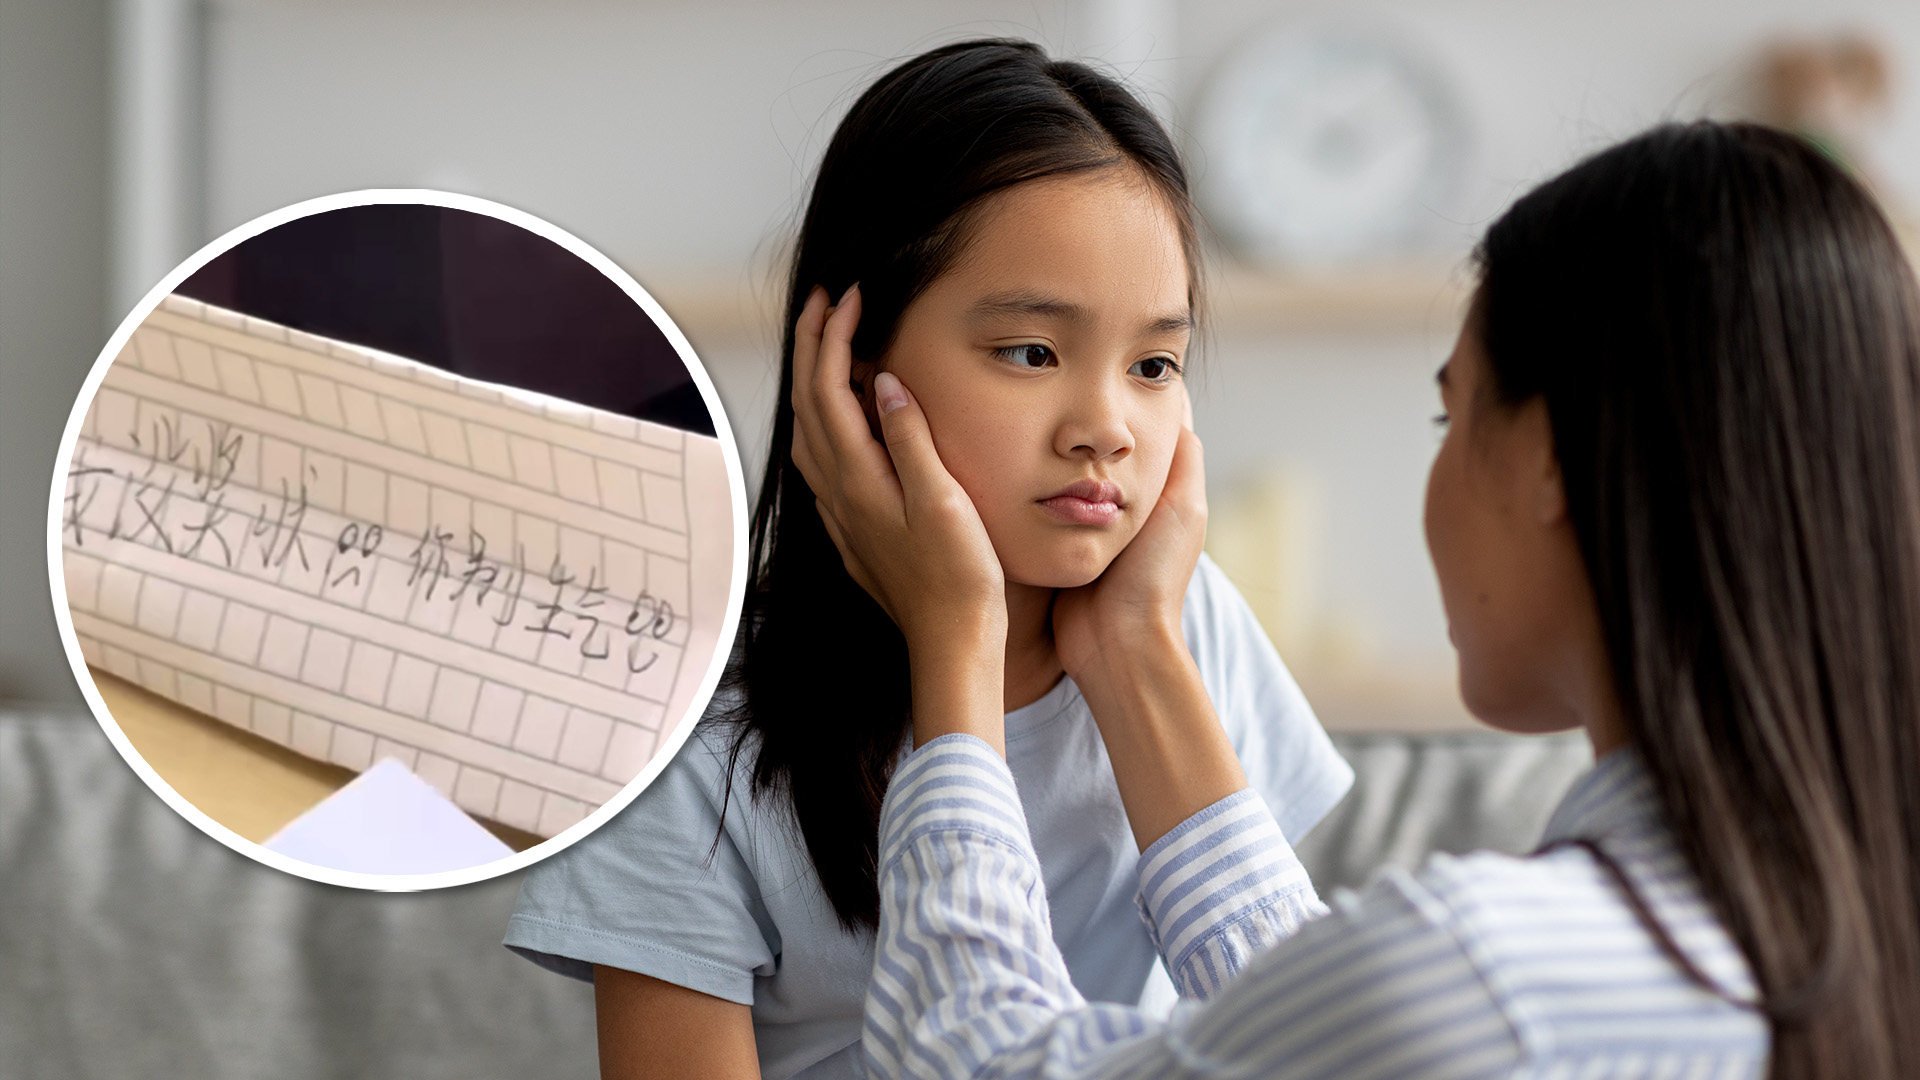 A schoolgirl in China has been praised online after she left a note for her mother at a parent-teacher meeting asking her not to be mad over her lack of awards. Photo: SCMP composite/Shutterstock/Douyin